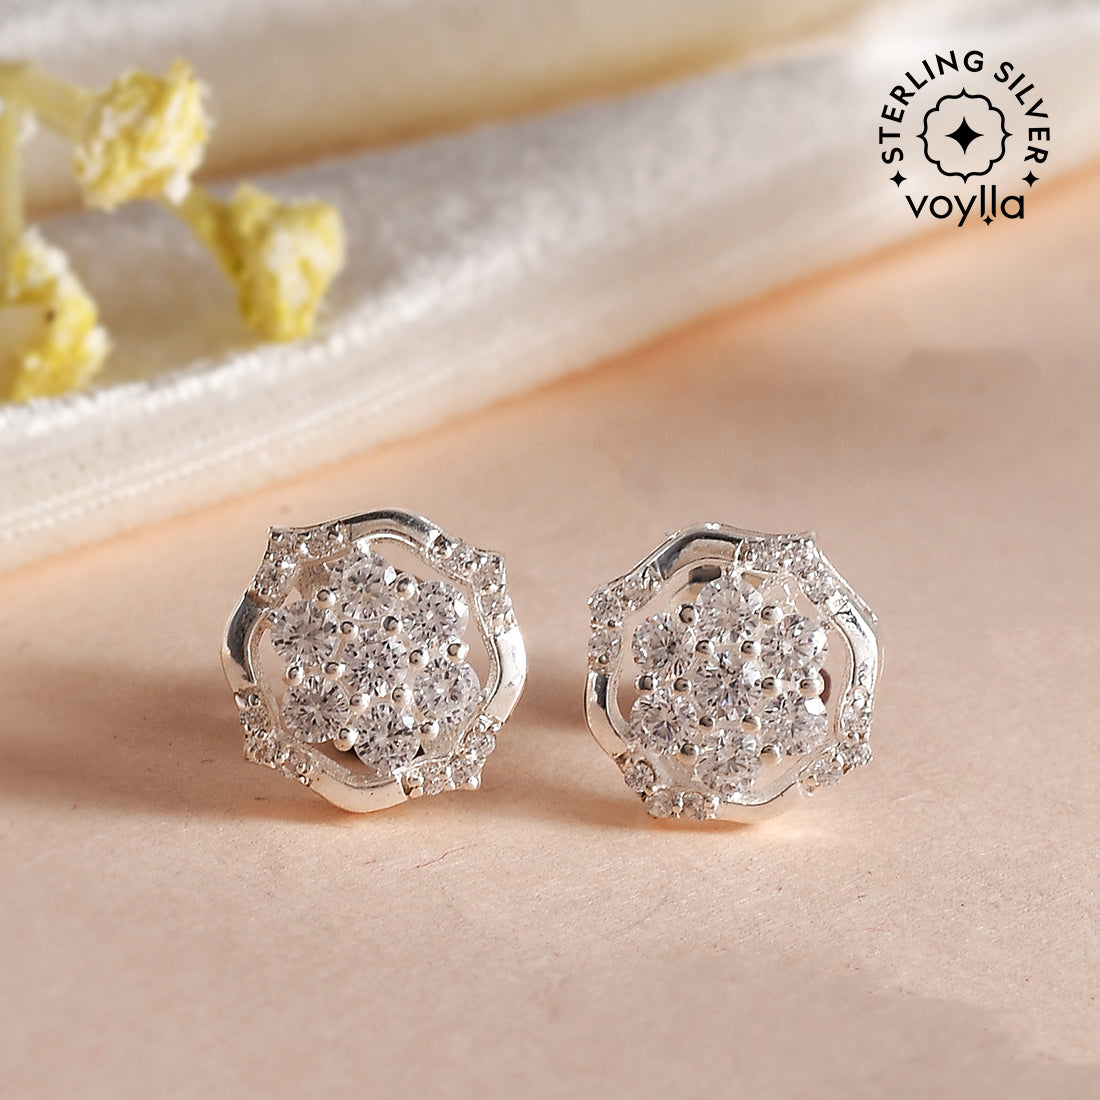 Buy Voylla CZ Sparkling Stud-Drop Earrings Online at Low Prices in India -  Paytmmall.com